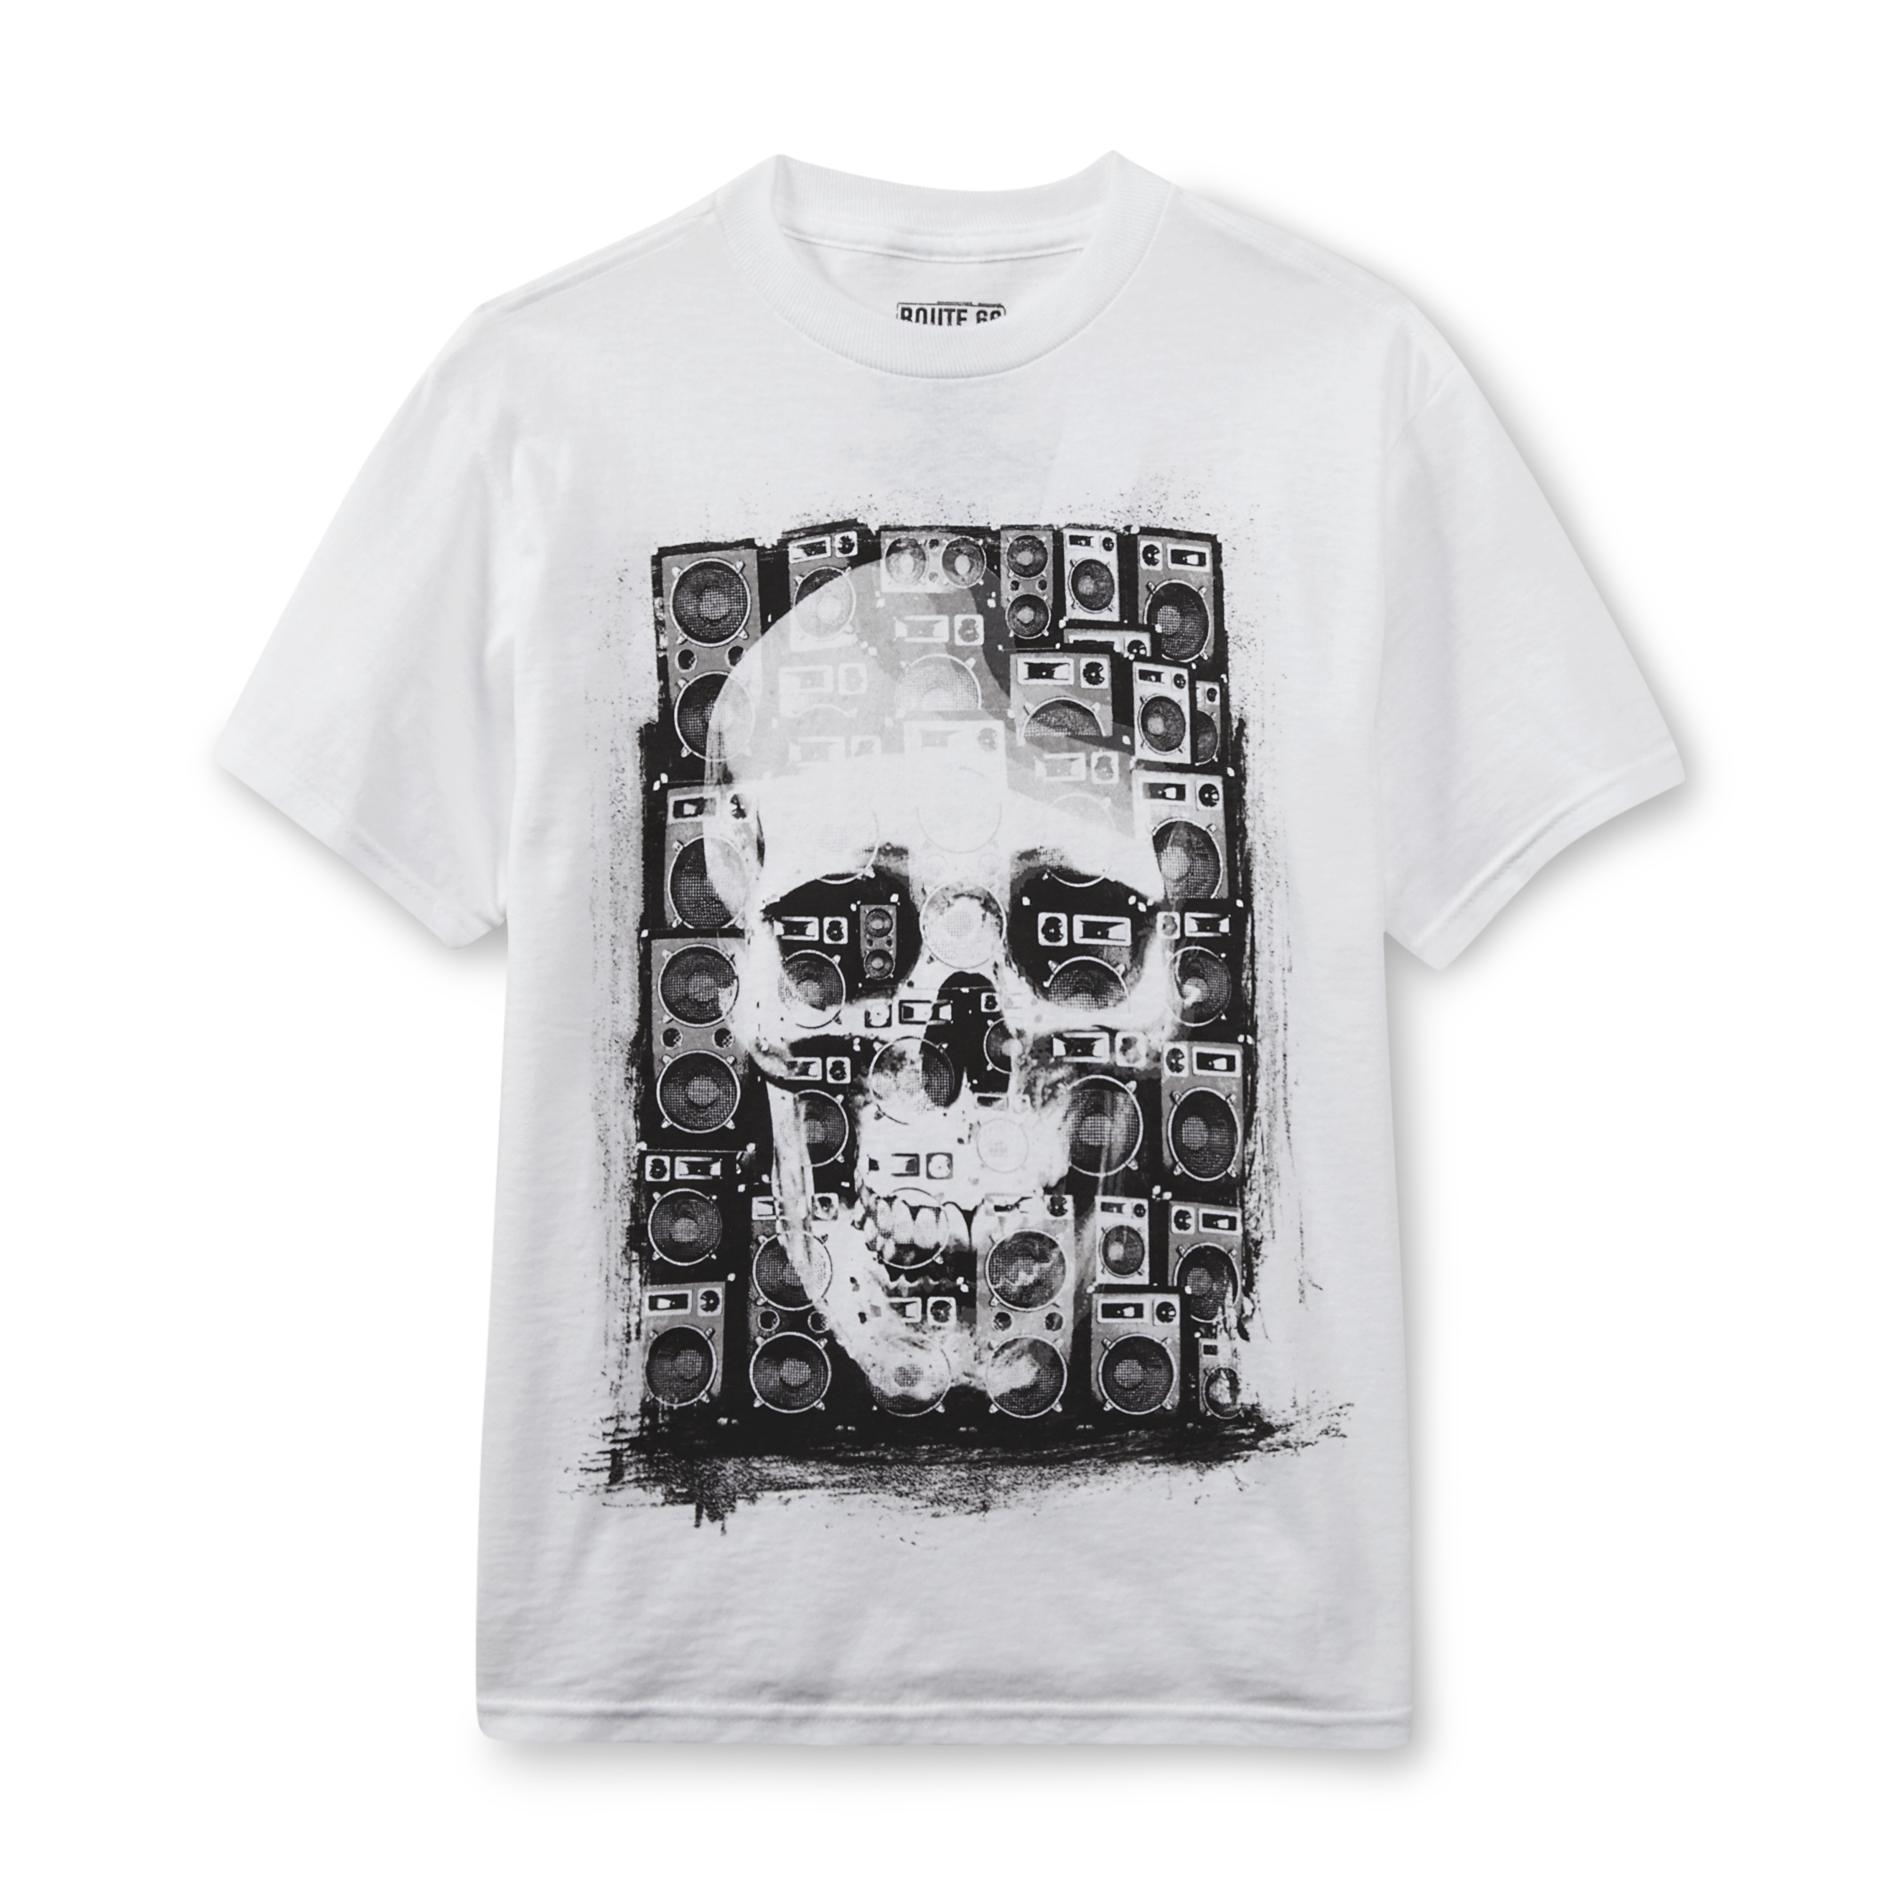 Route 66 Boy's Graphic T-Shirt - Skull & Speakers